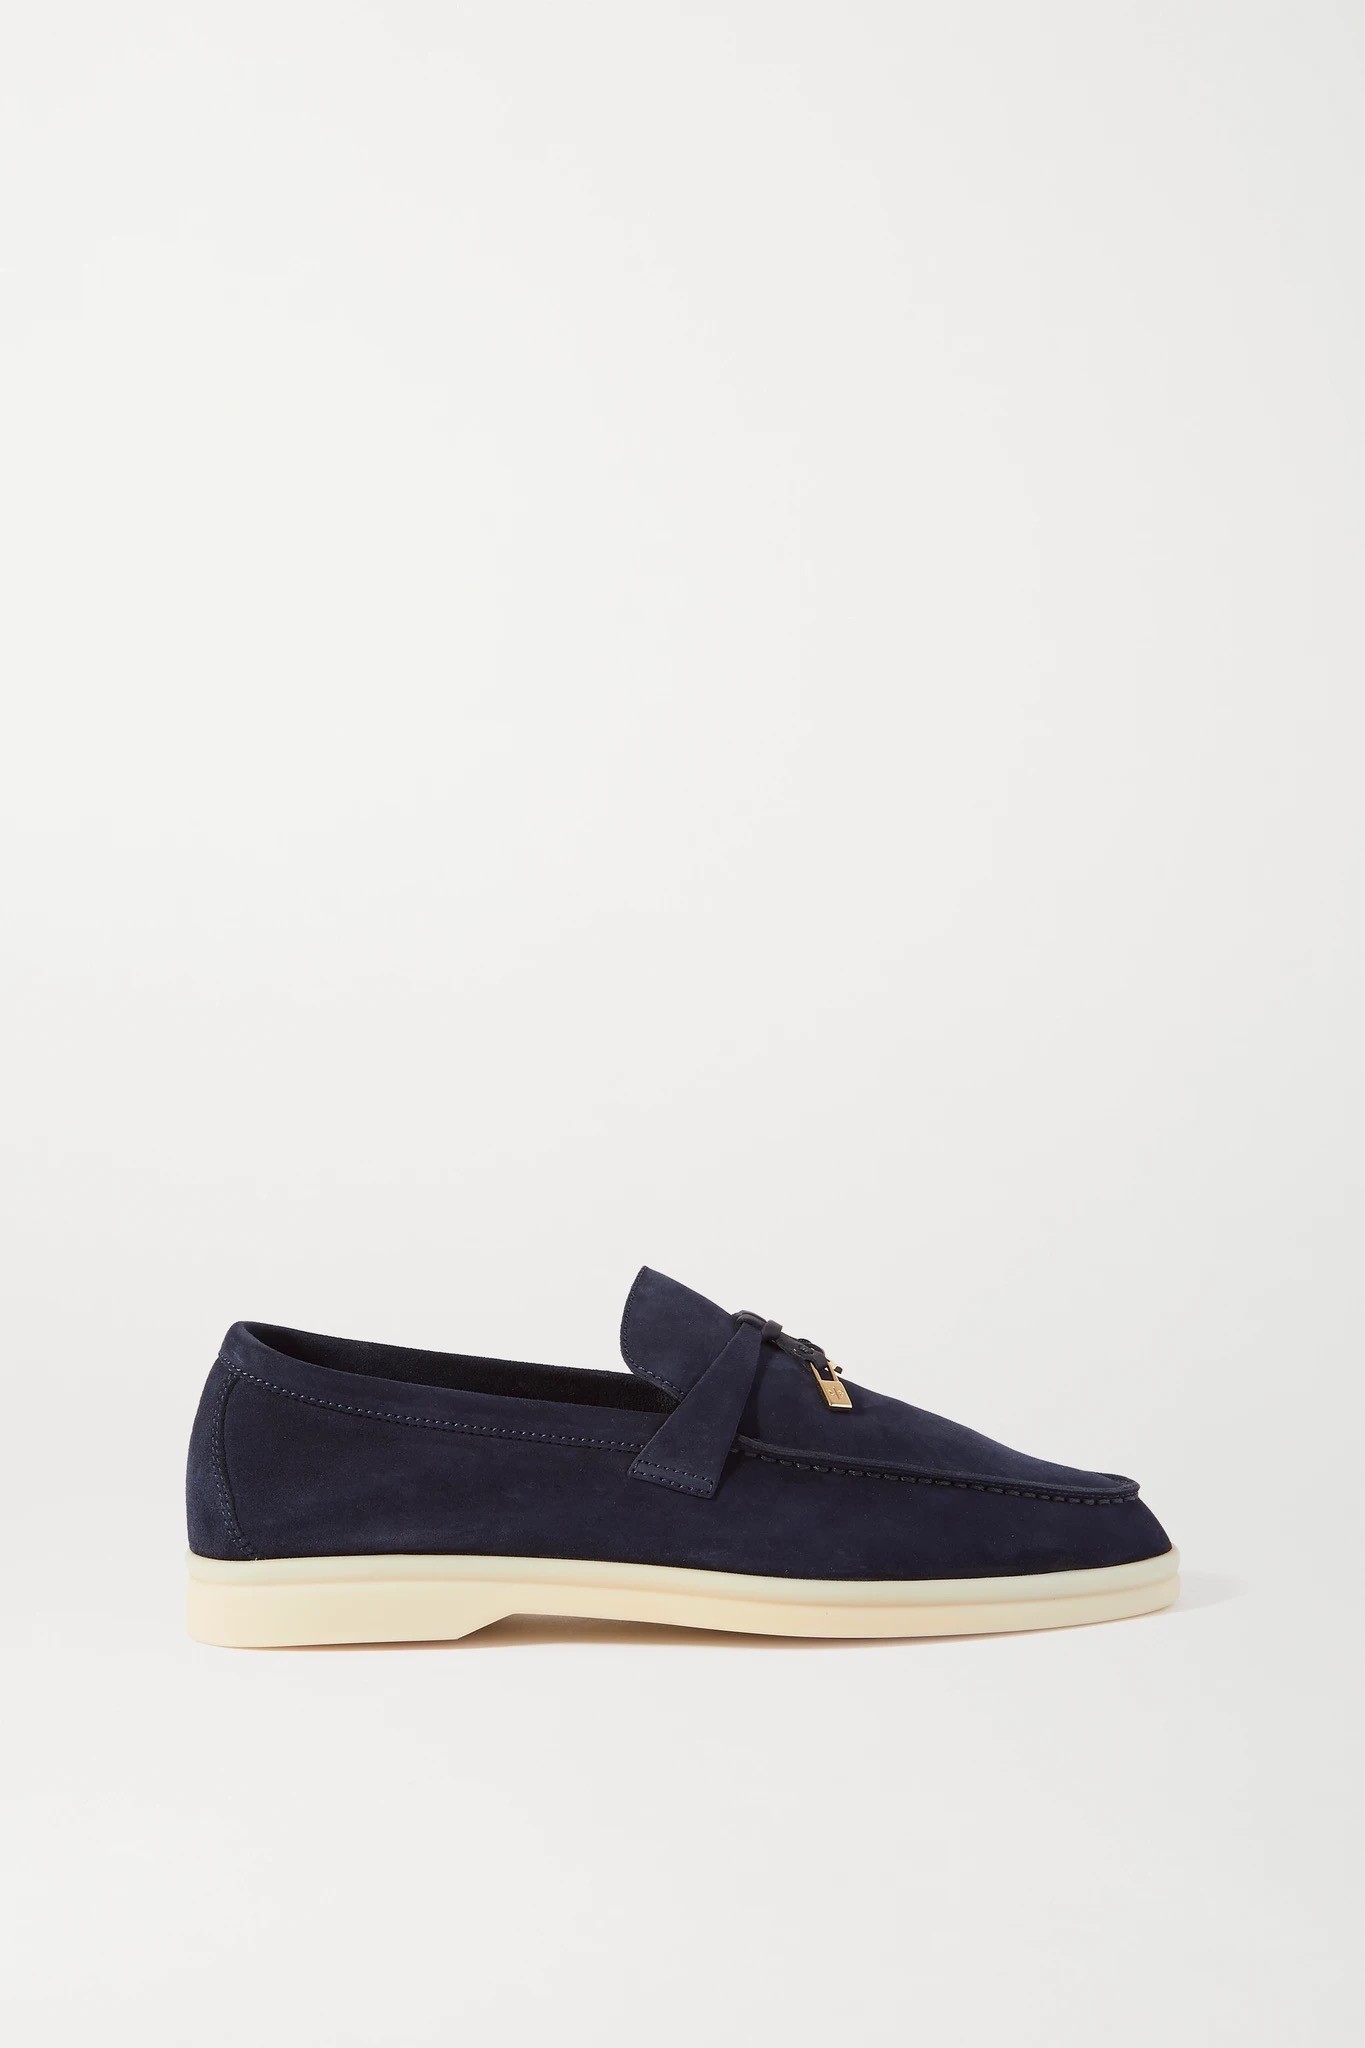 Loro Piana - Summer Charms Walk Moccasin Loafers - Deep Blue